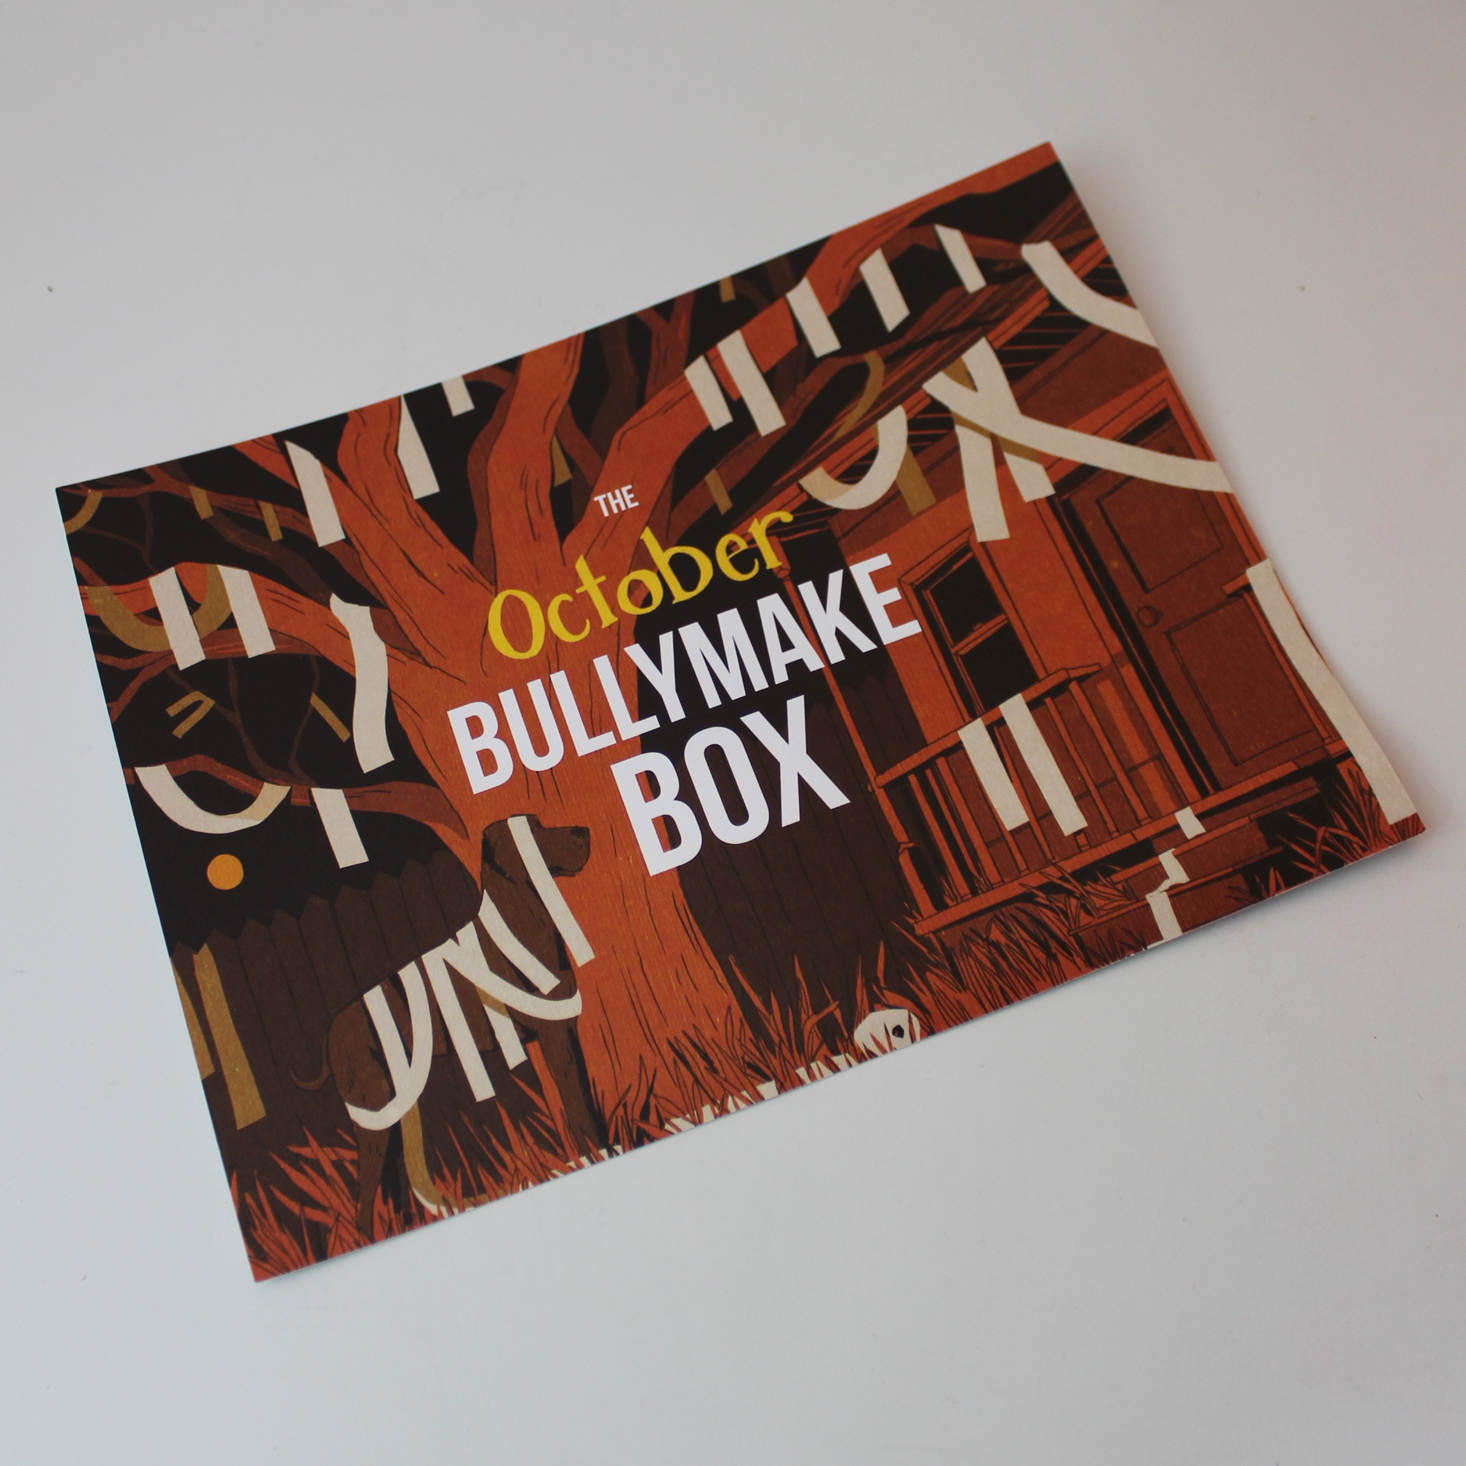 Bullymake Box October 2019 Booklet Front